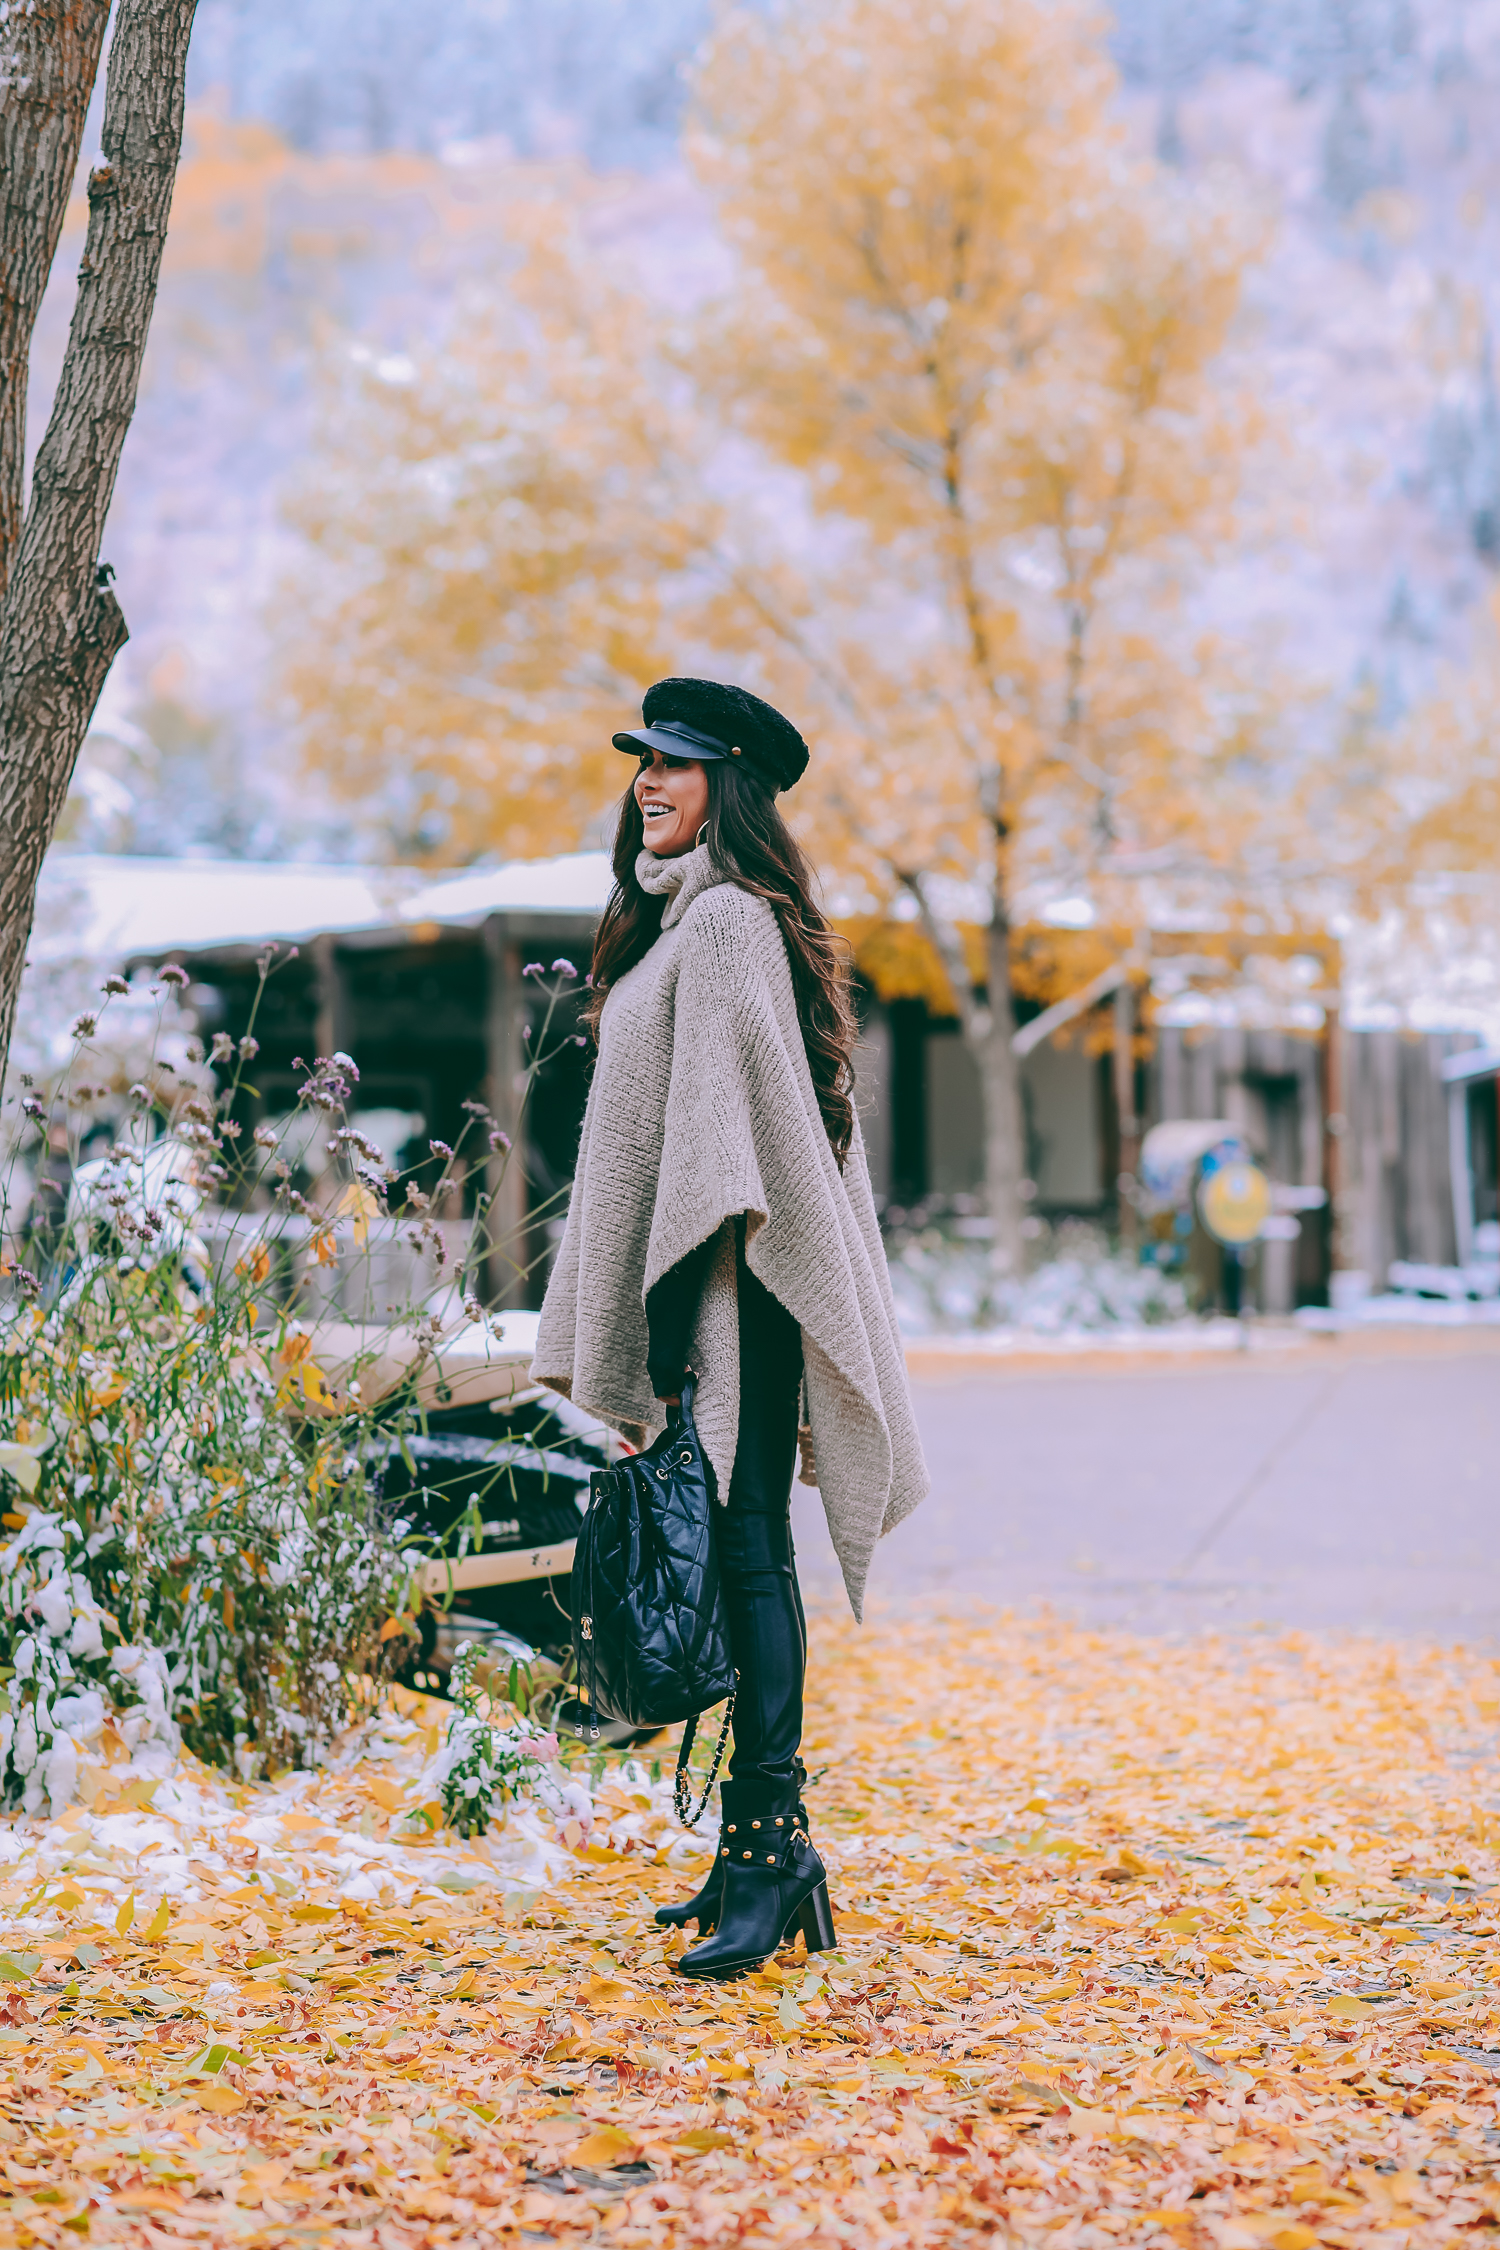 Cute snow day outfits styled by top US fashion blog, The Sweetest Thing: image of a woman wearing a Caslon black top, BlankNYC pants, See by Chloe boots, Leith baker boy cap, and a Chanel backpack | winter 2019 fashion outfits pinterest, mango cape poncho, chanel black quilted backpack, aspen fashion blogger, emily gemma, cute outfits for aspen-2